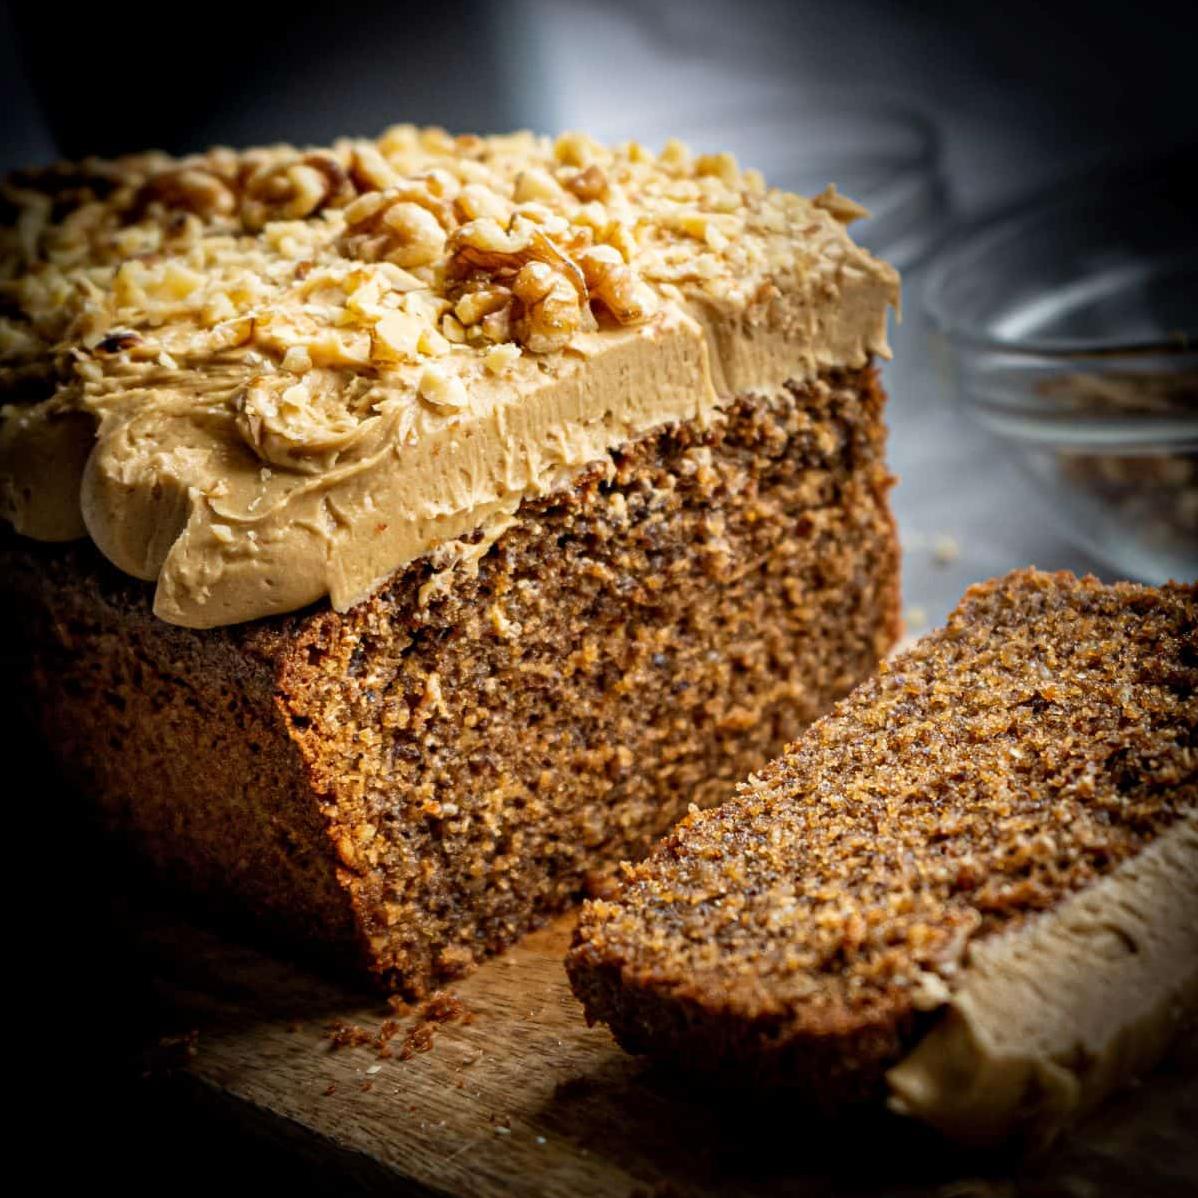  A crunchy twist to your classic coffee cake